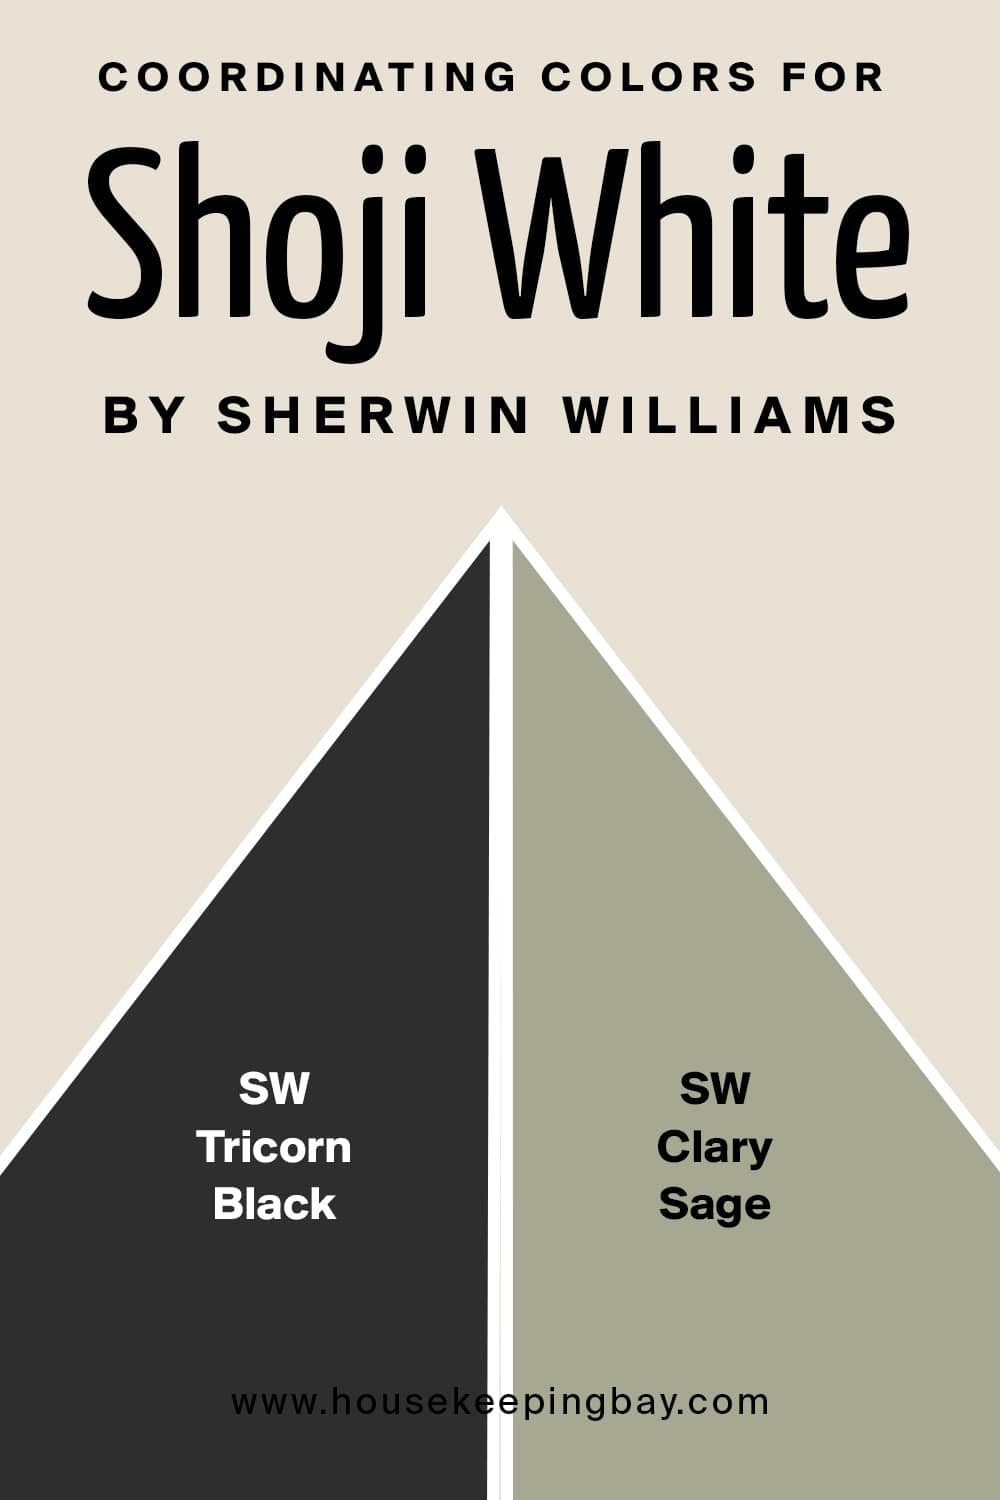 Coordinating Colors for Shoji White by Sherwin Williams